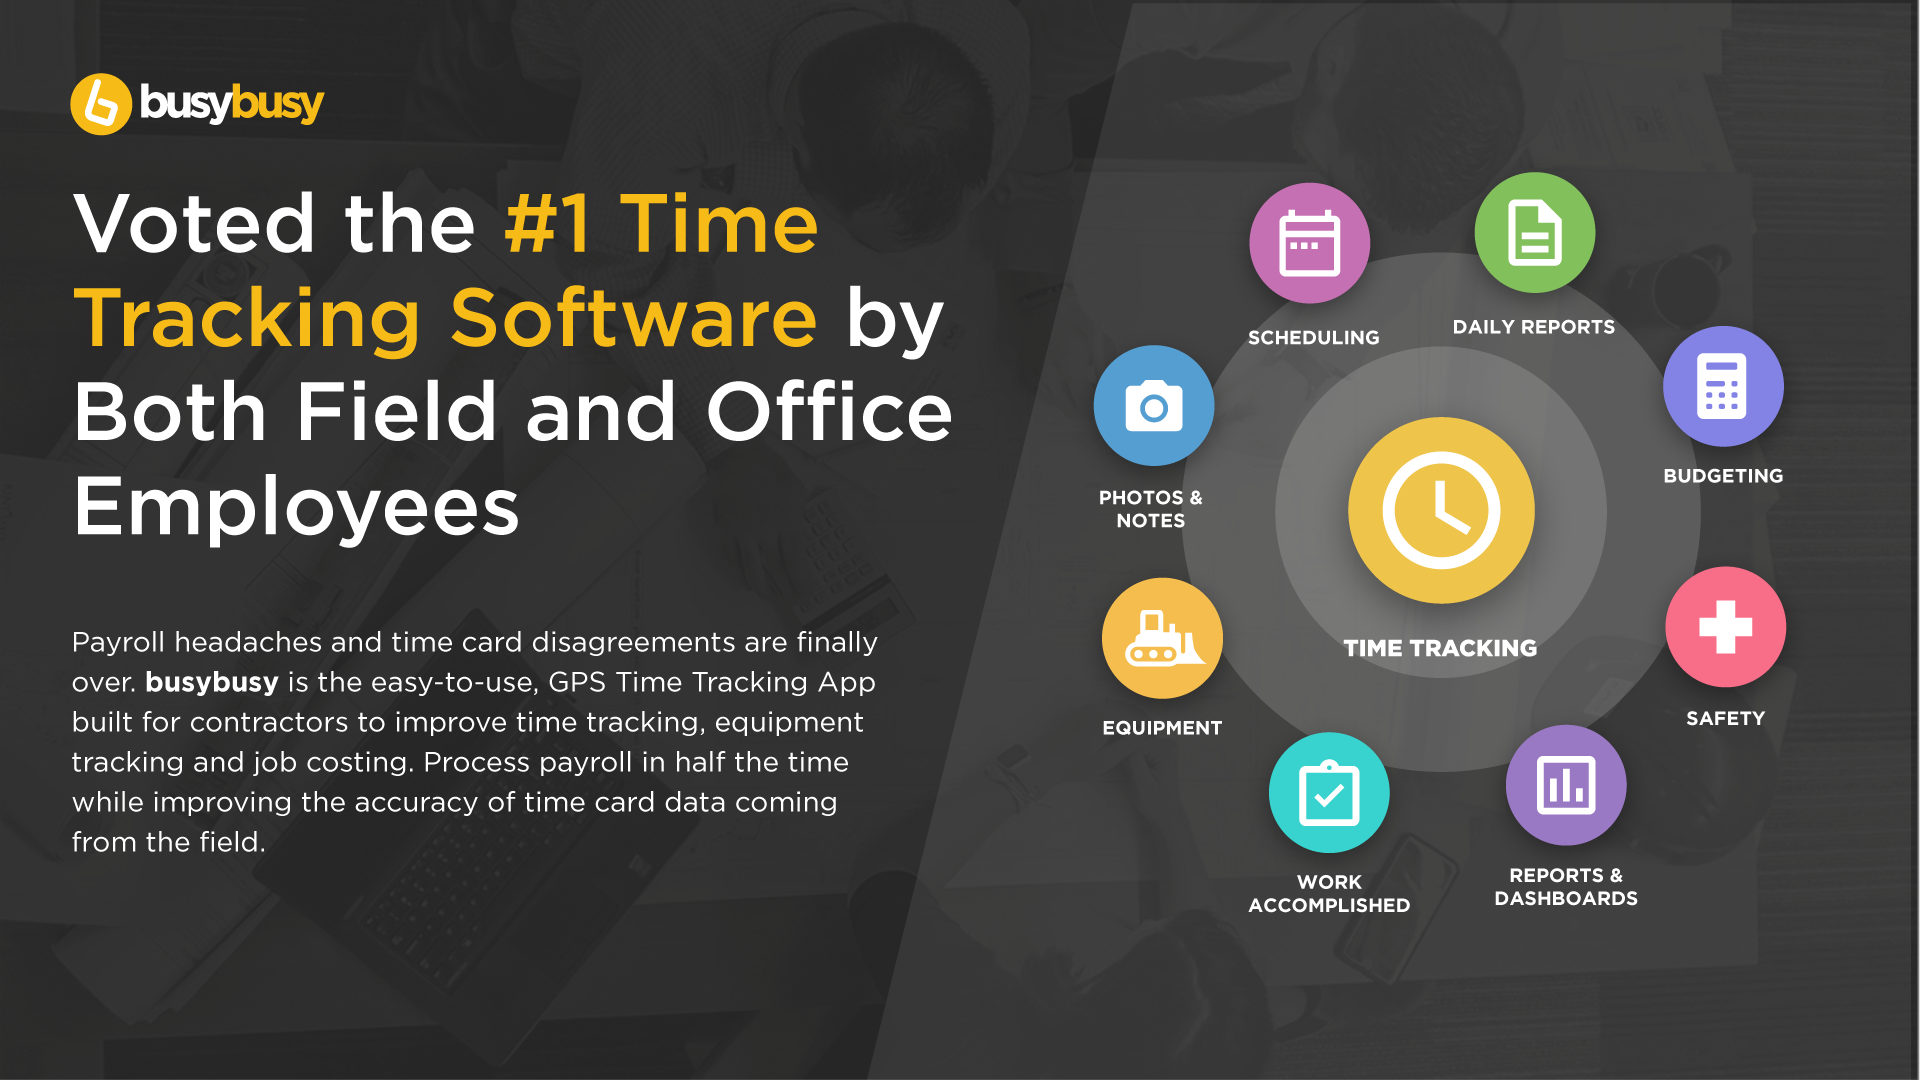 #1 Time Tracking Software